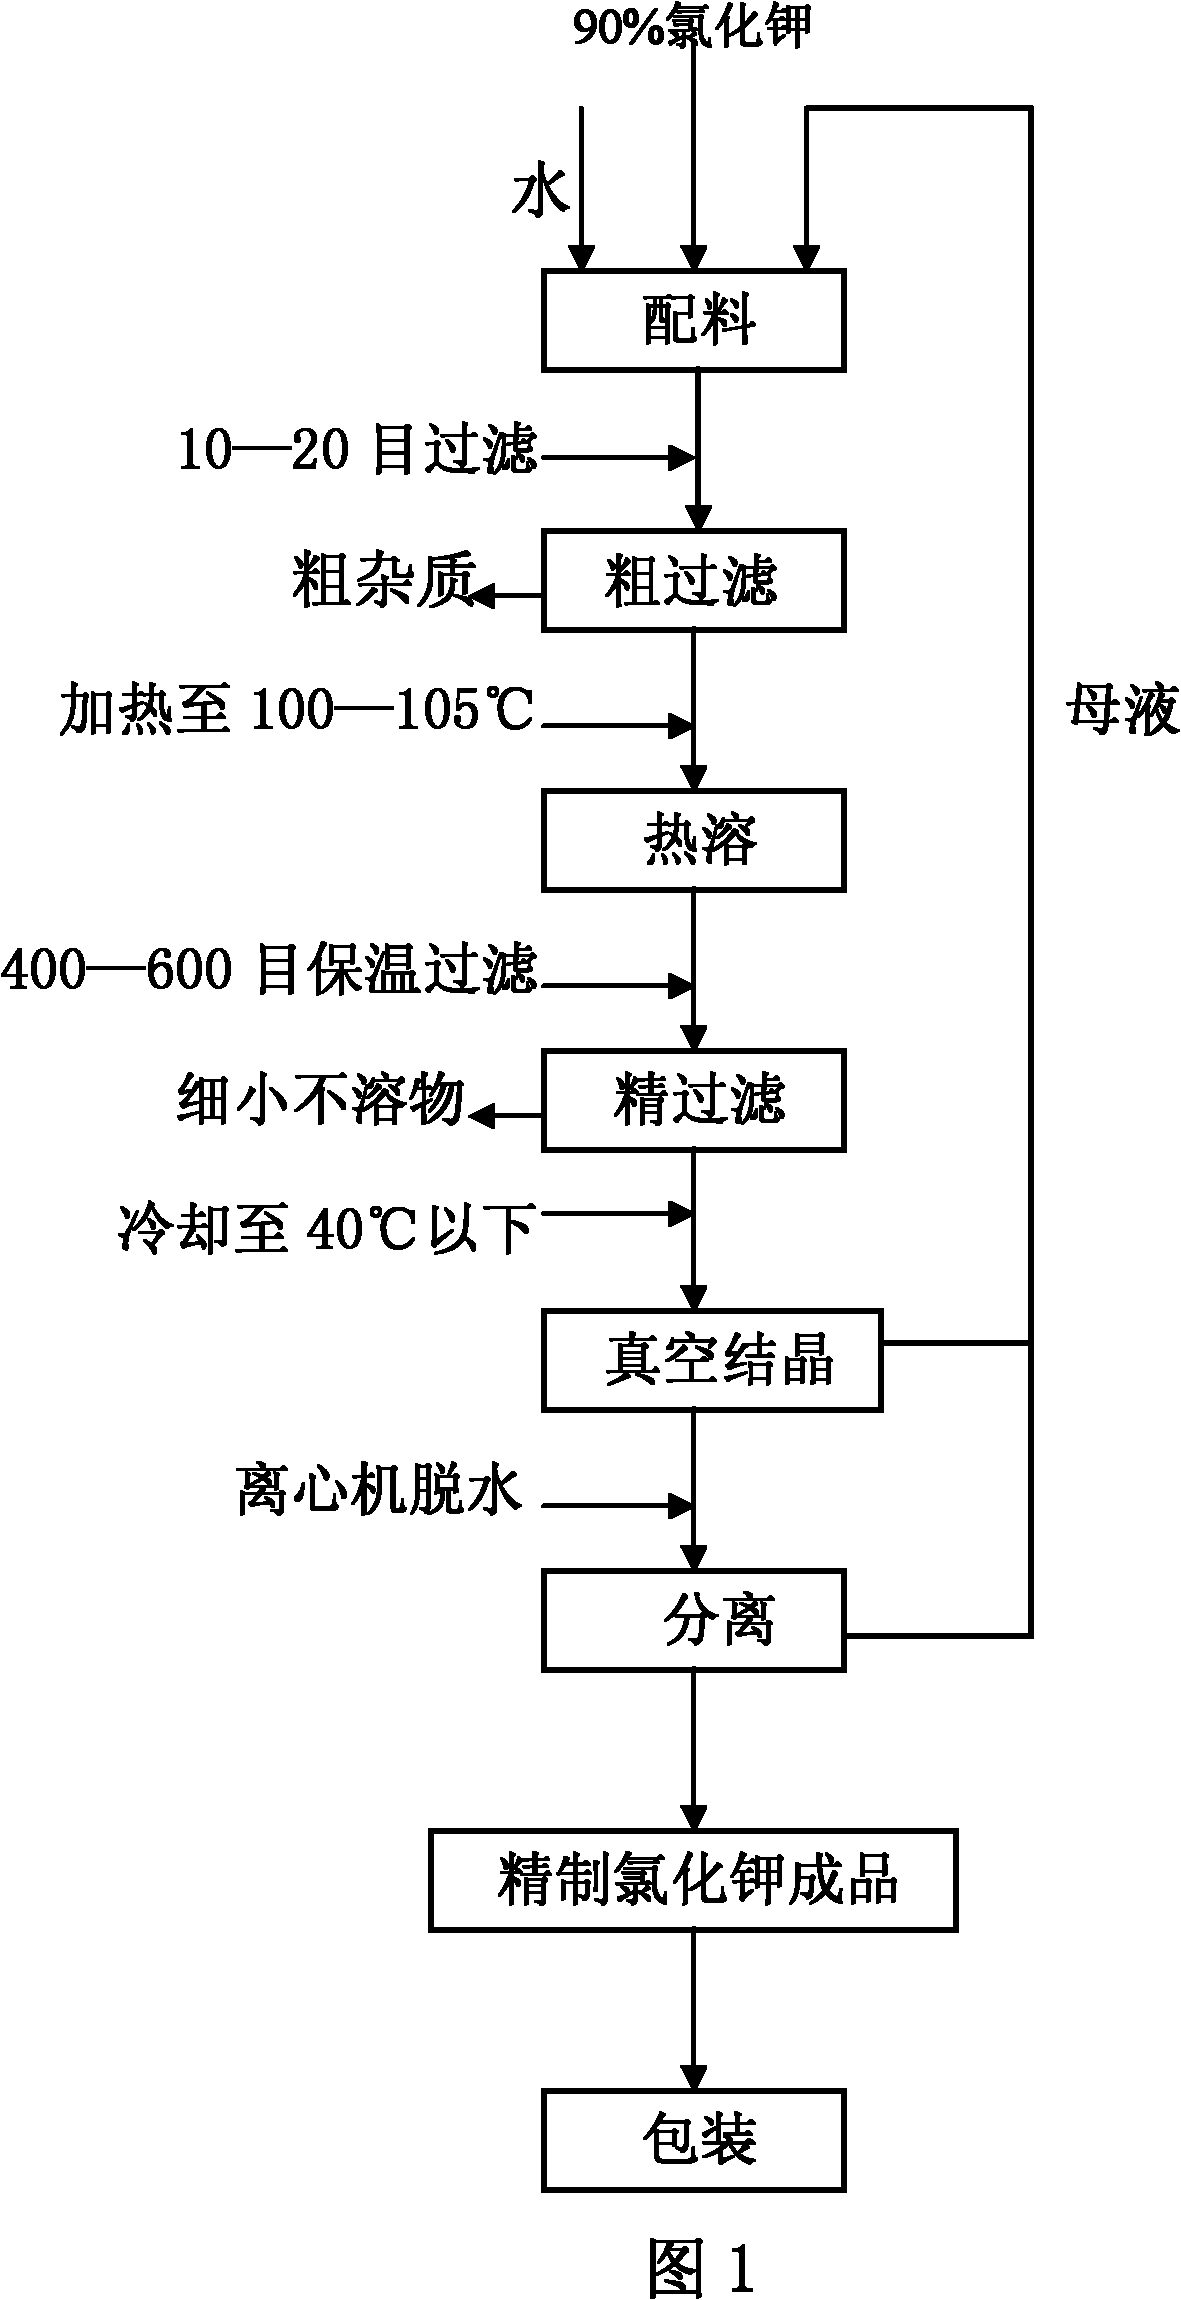 Production process of refined potassium chloride